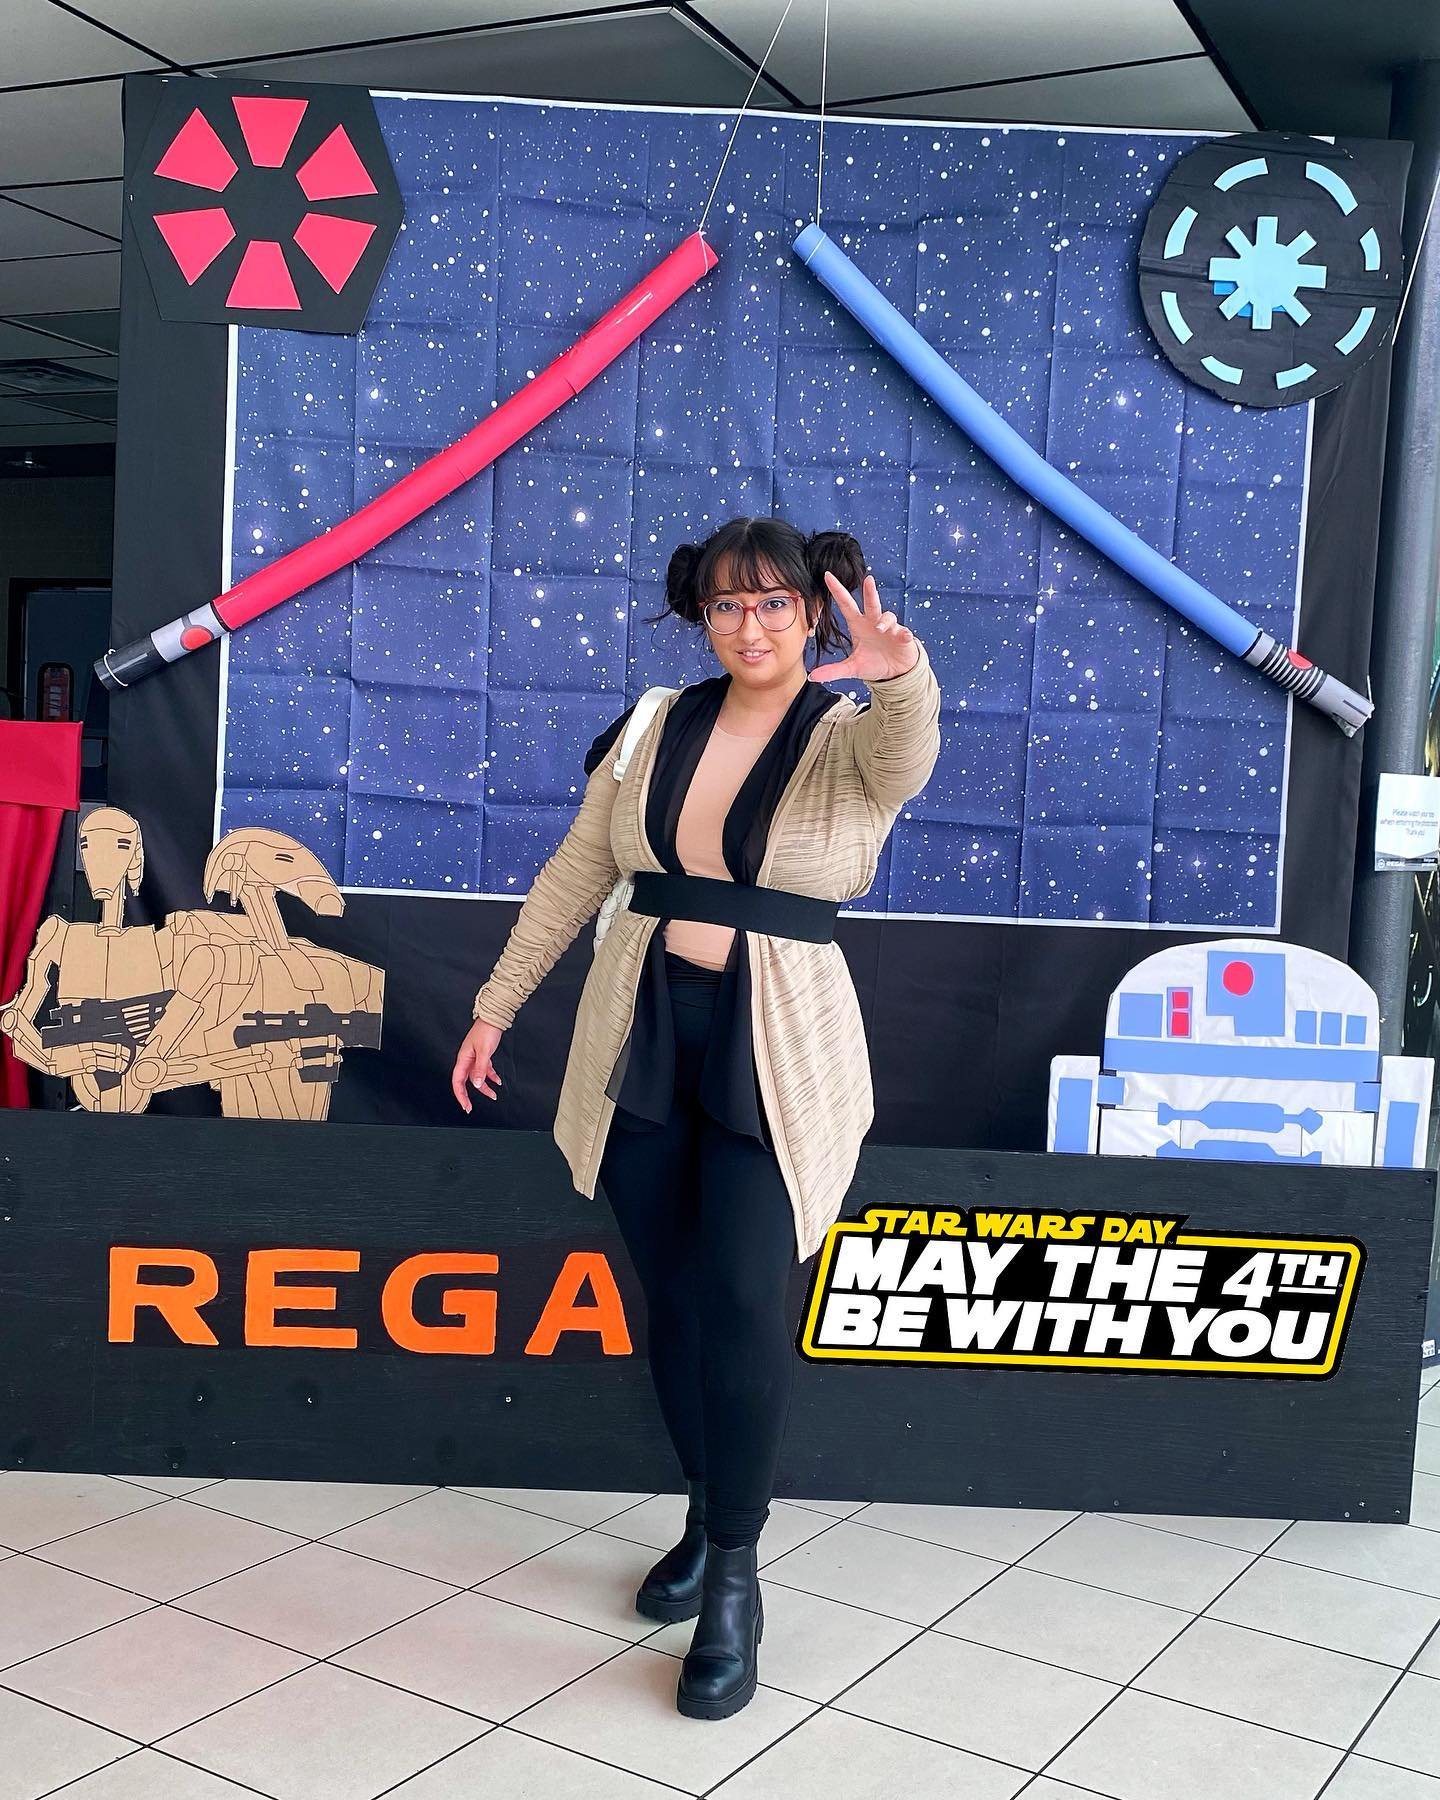 May the 4th Be With You! 🌟We celebrated by seeing Episode I at @regalmovies 🎬🍿The prequels get a lot of hate but I love the world building and Natalie Portman ❤️ 

#maythe4thbewithyou #regalcinemas #starwarsoutfit #starwarsbounding #disneybound #s